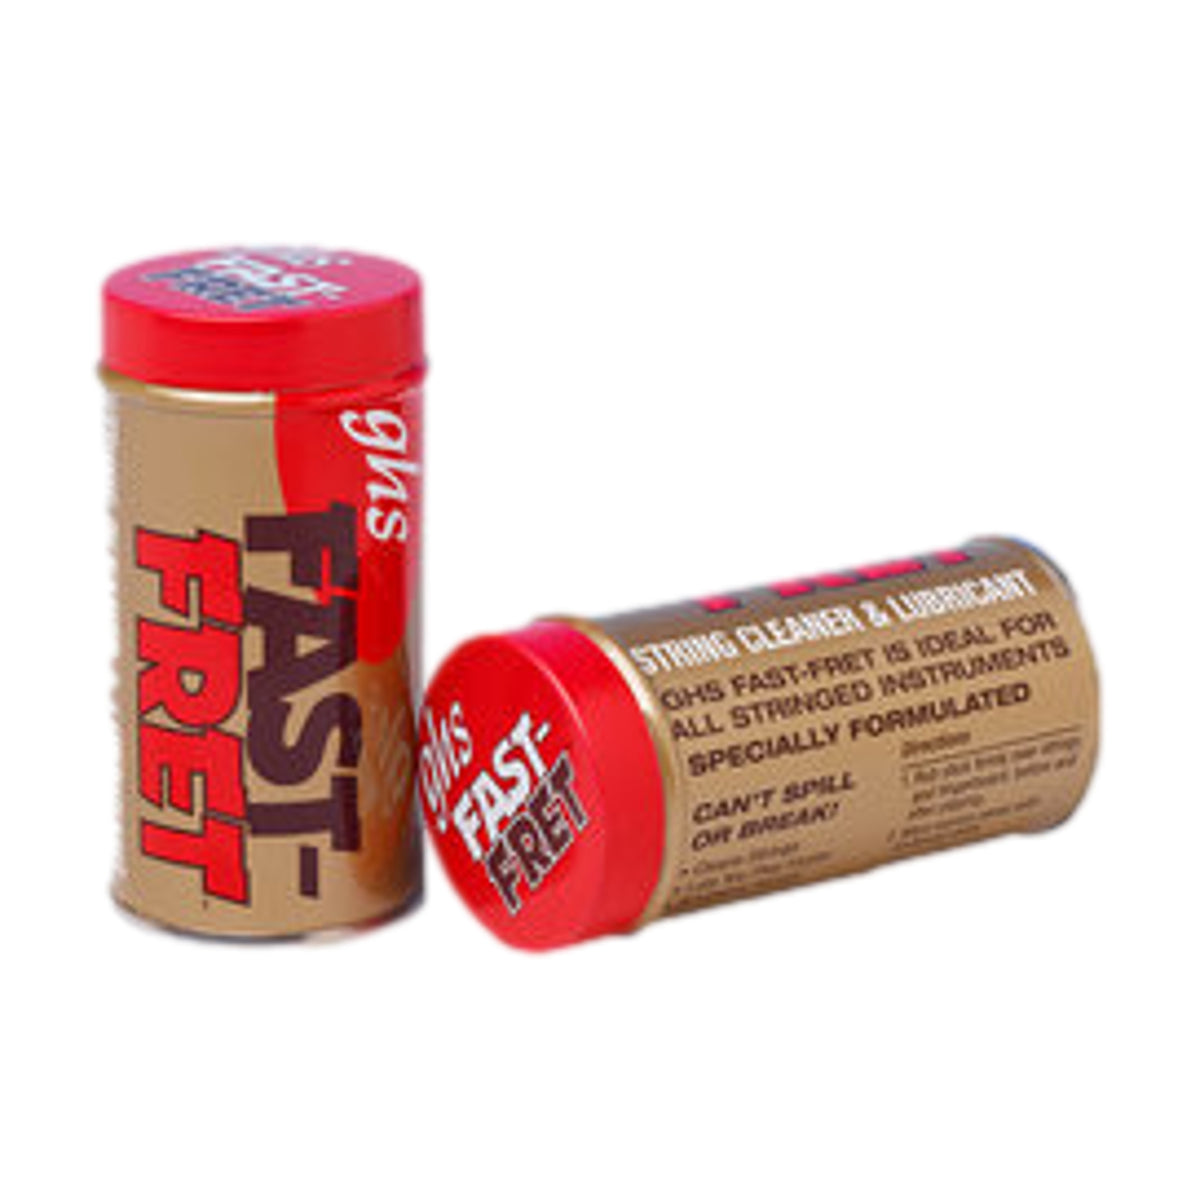 GHS Fast Fret Can Guitar String Cleaner and Lubricant